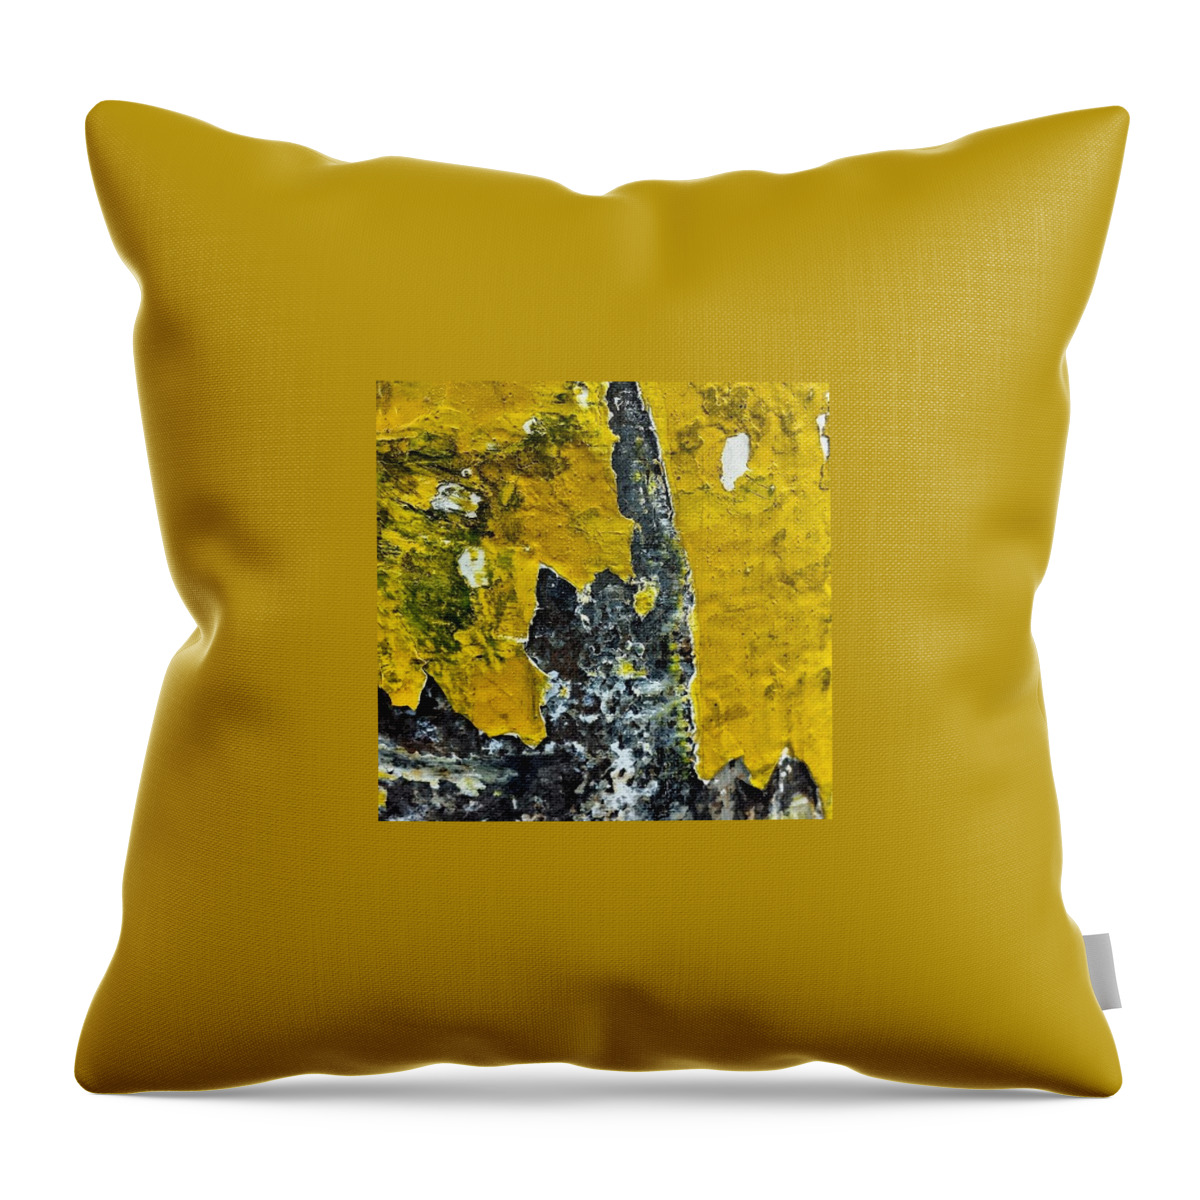 Beautiful Throw Pillow featuring the photograph Yellow Post 2 by Jason Roust